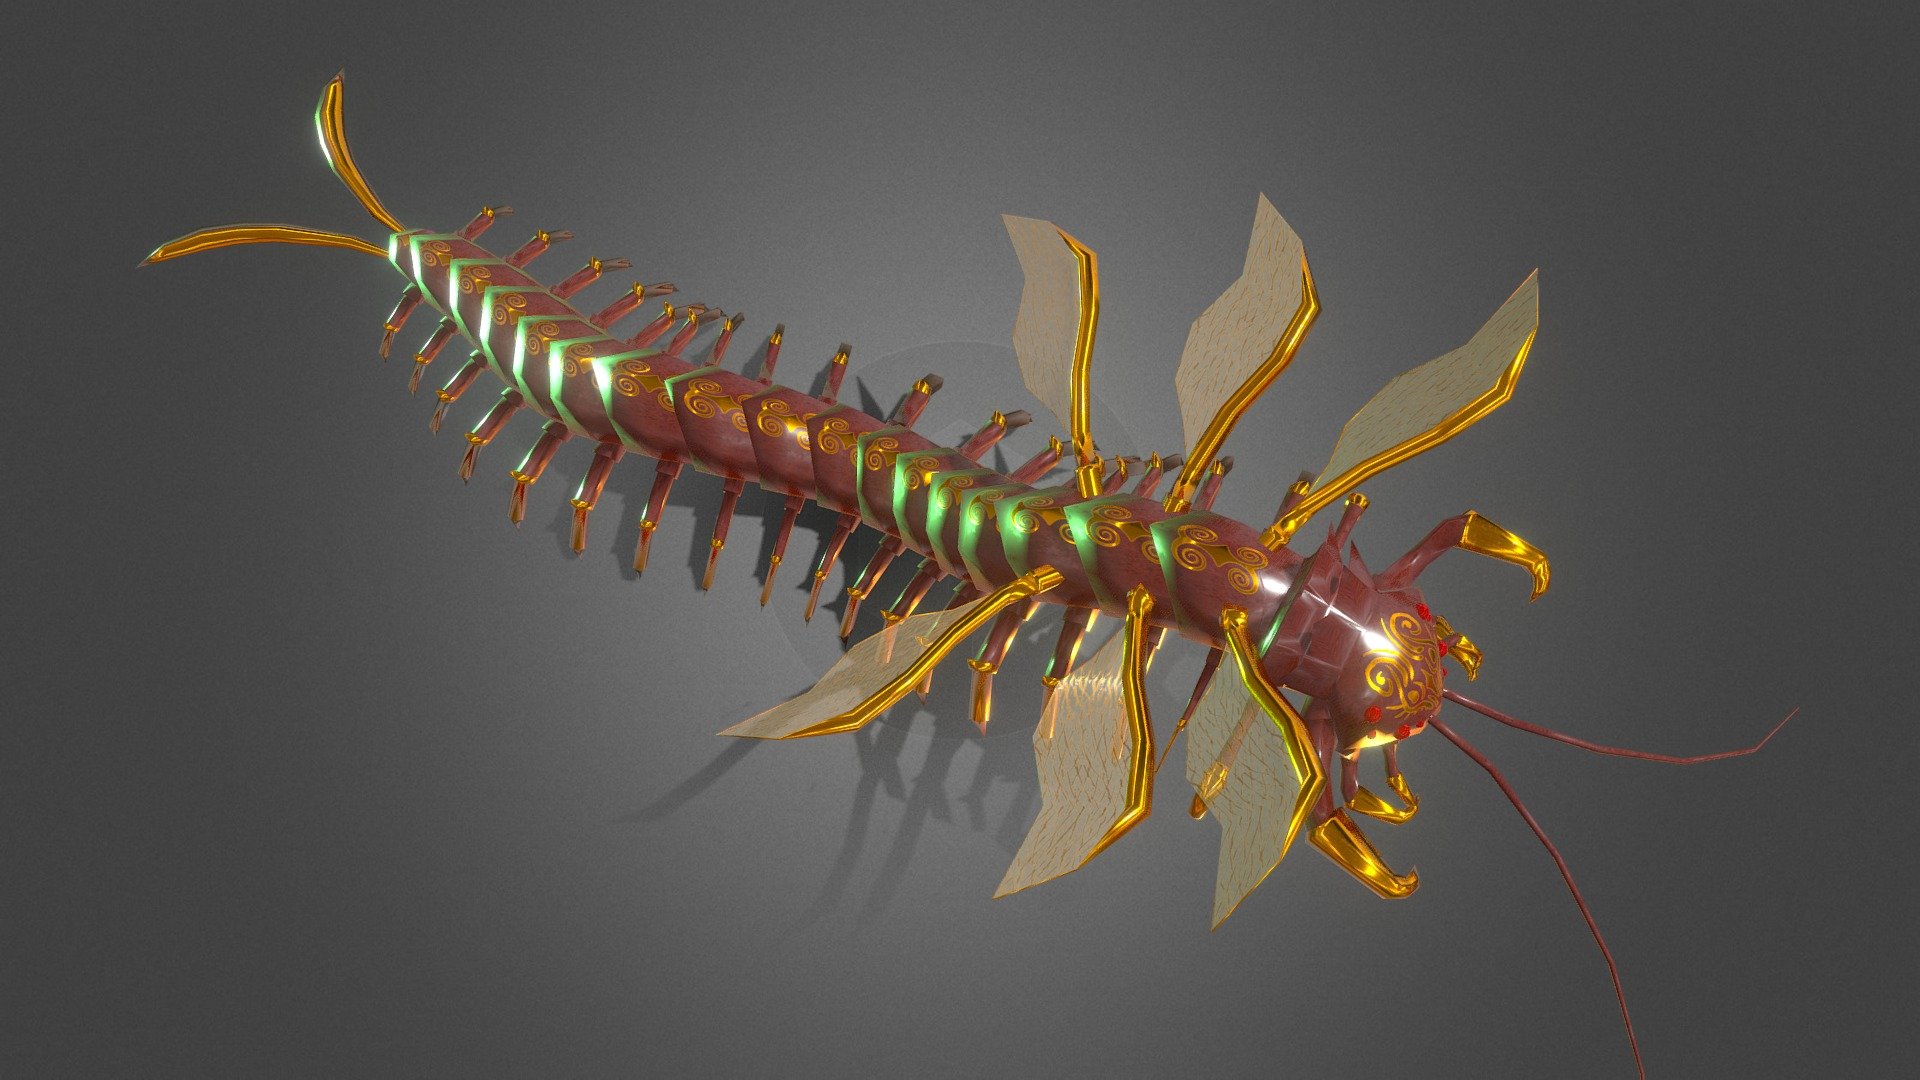 This is a mythological creature, a flying giant centipede, that I created using Blender's PBR workflow.

Its material is composed of five PBR textures: BaseColor, Metalness, Roughness, Normal, and Opacity.

It can be directly imported into a game engine and render fantastic effects immediately 3d model